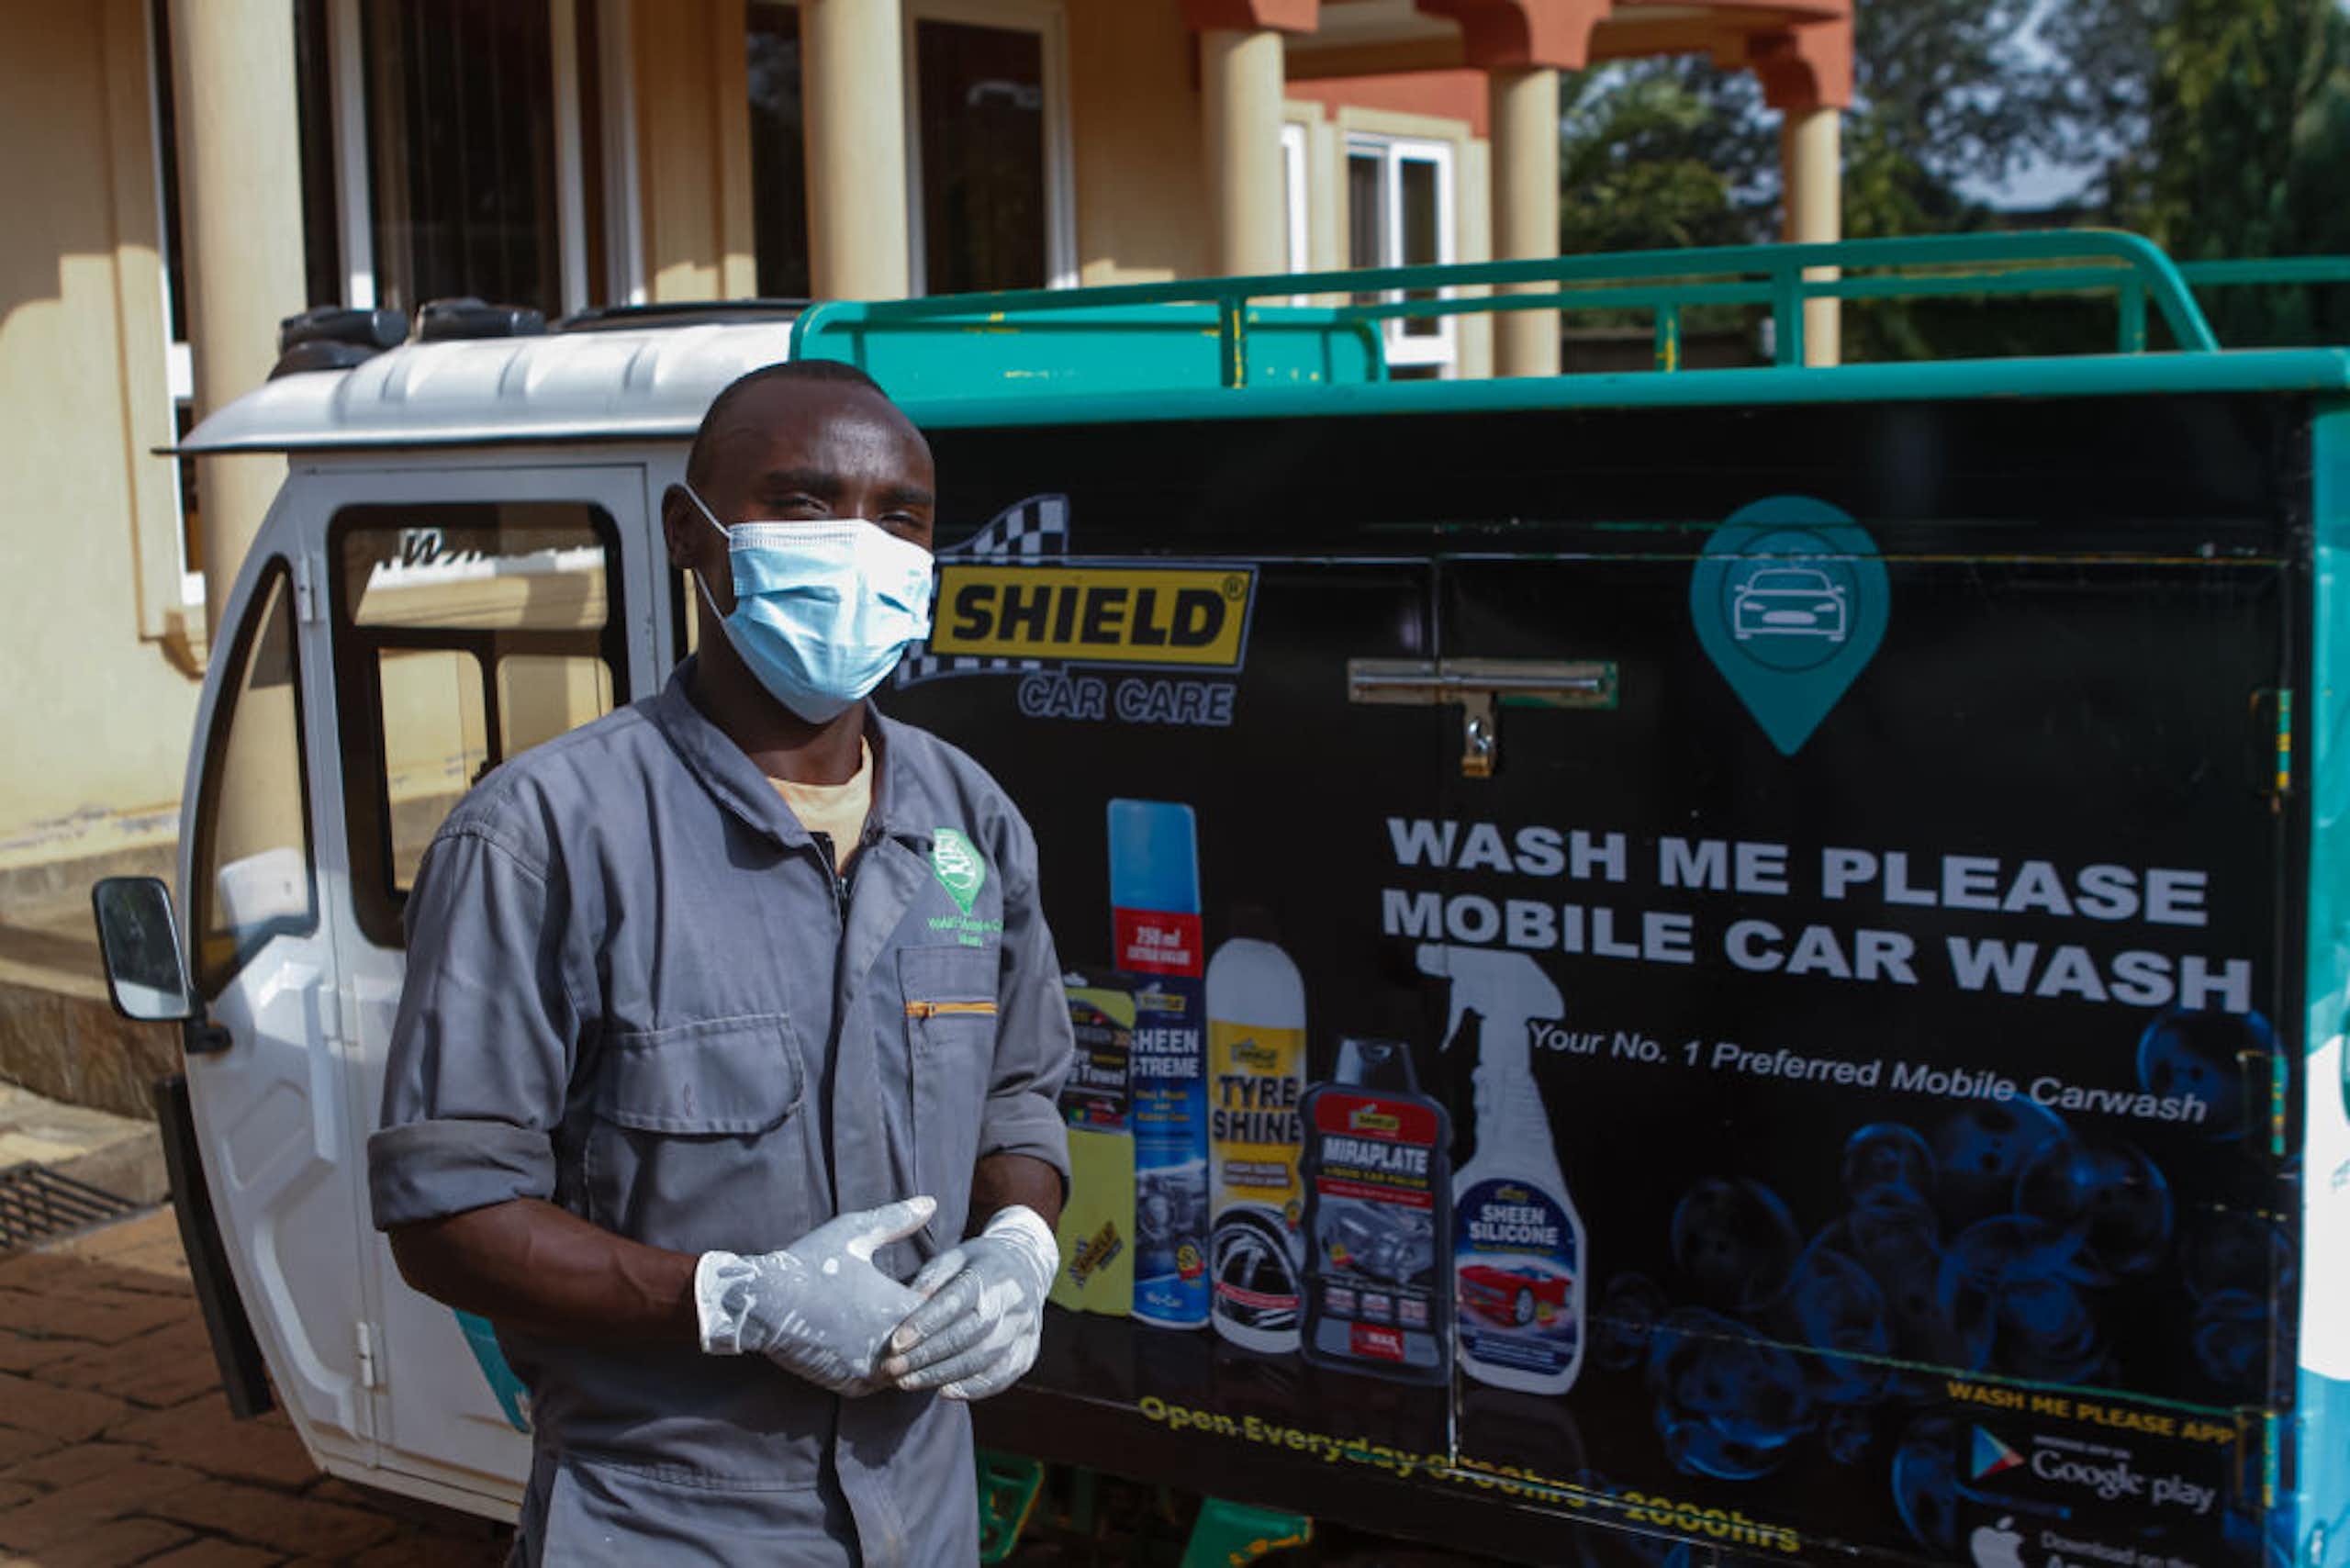 A young man in face mask and disposable gloves stands in front of a vehicle with car wash signage